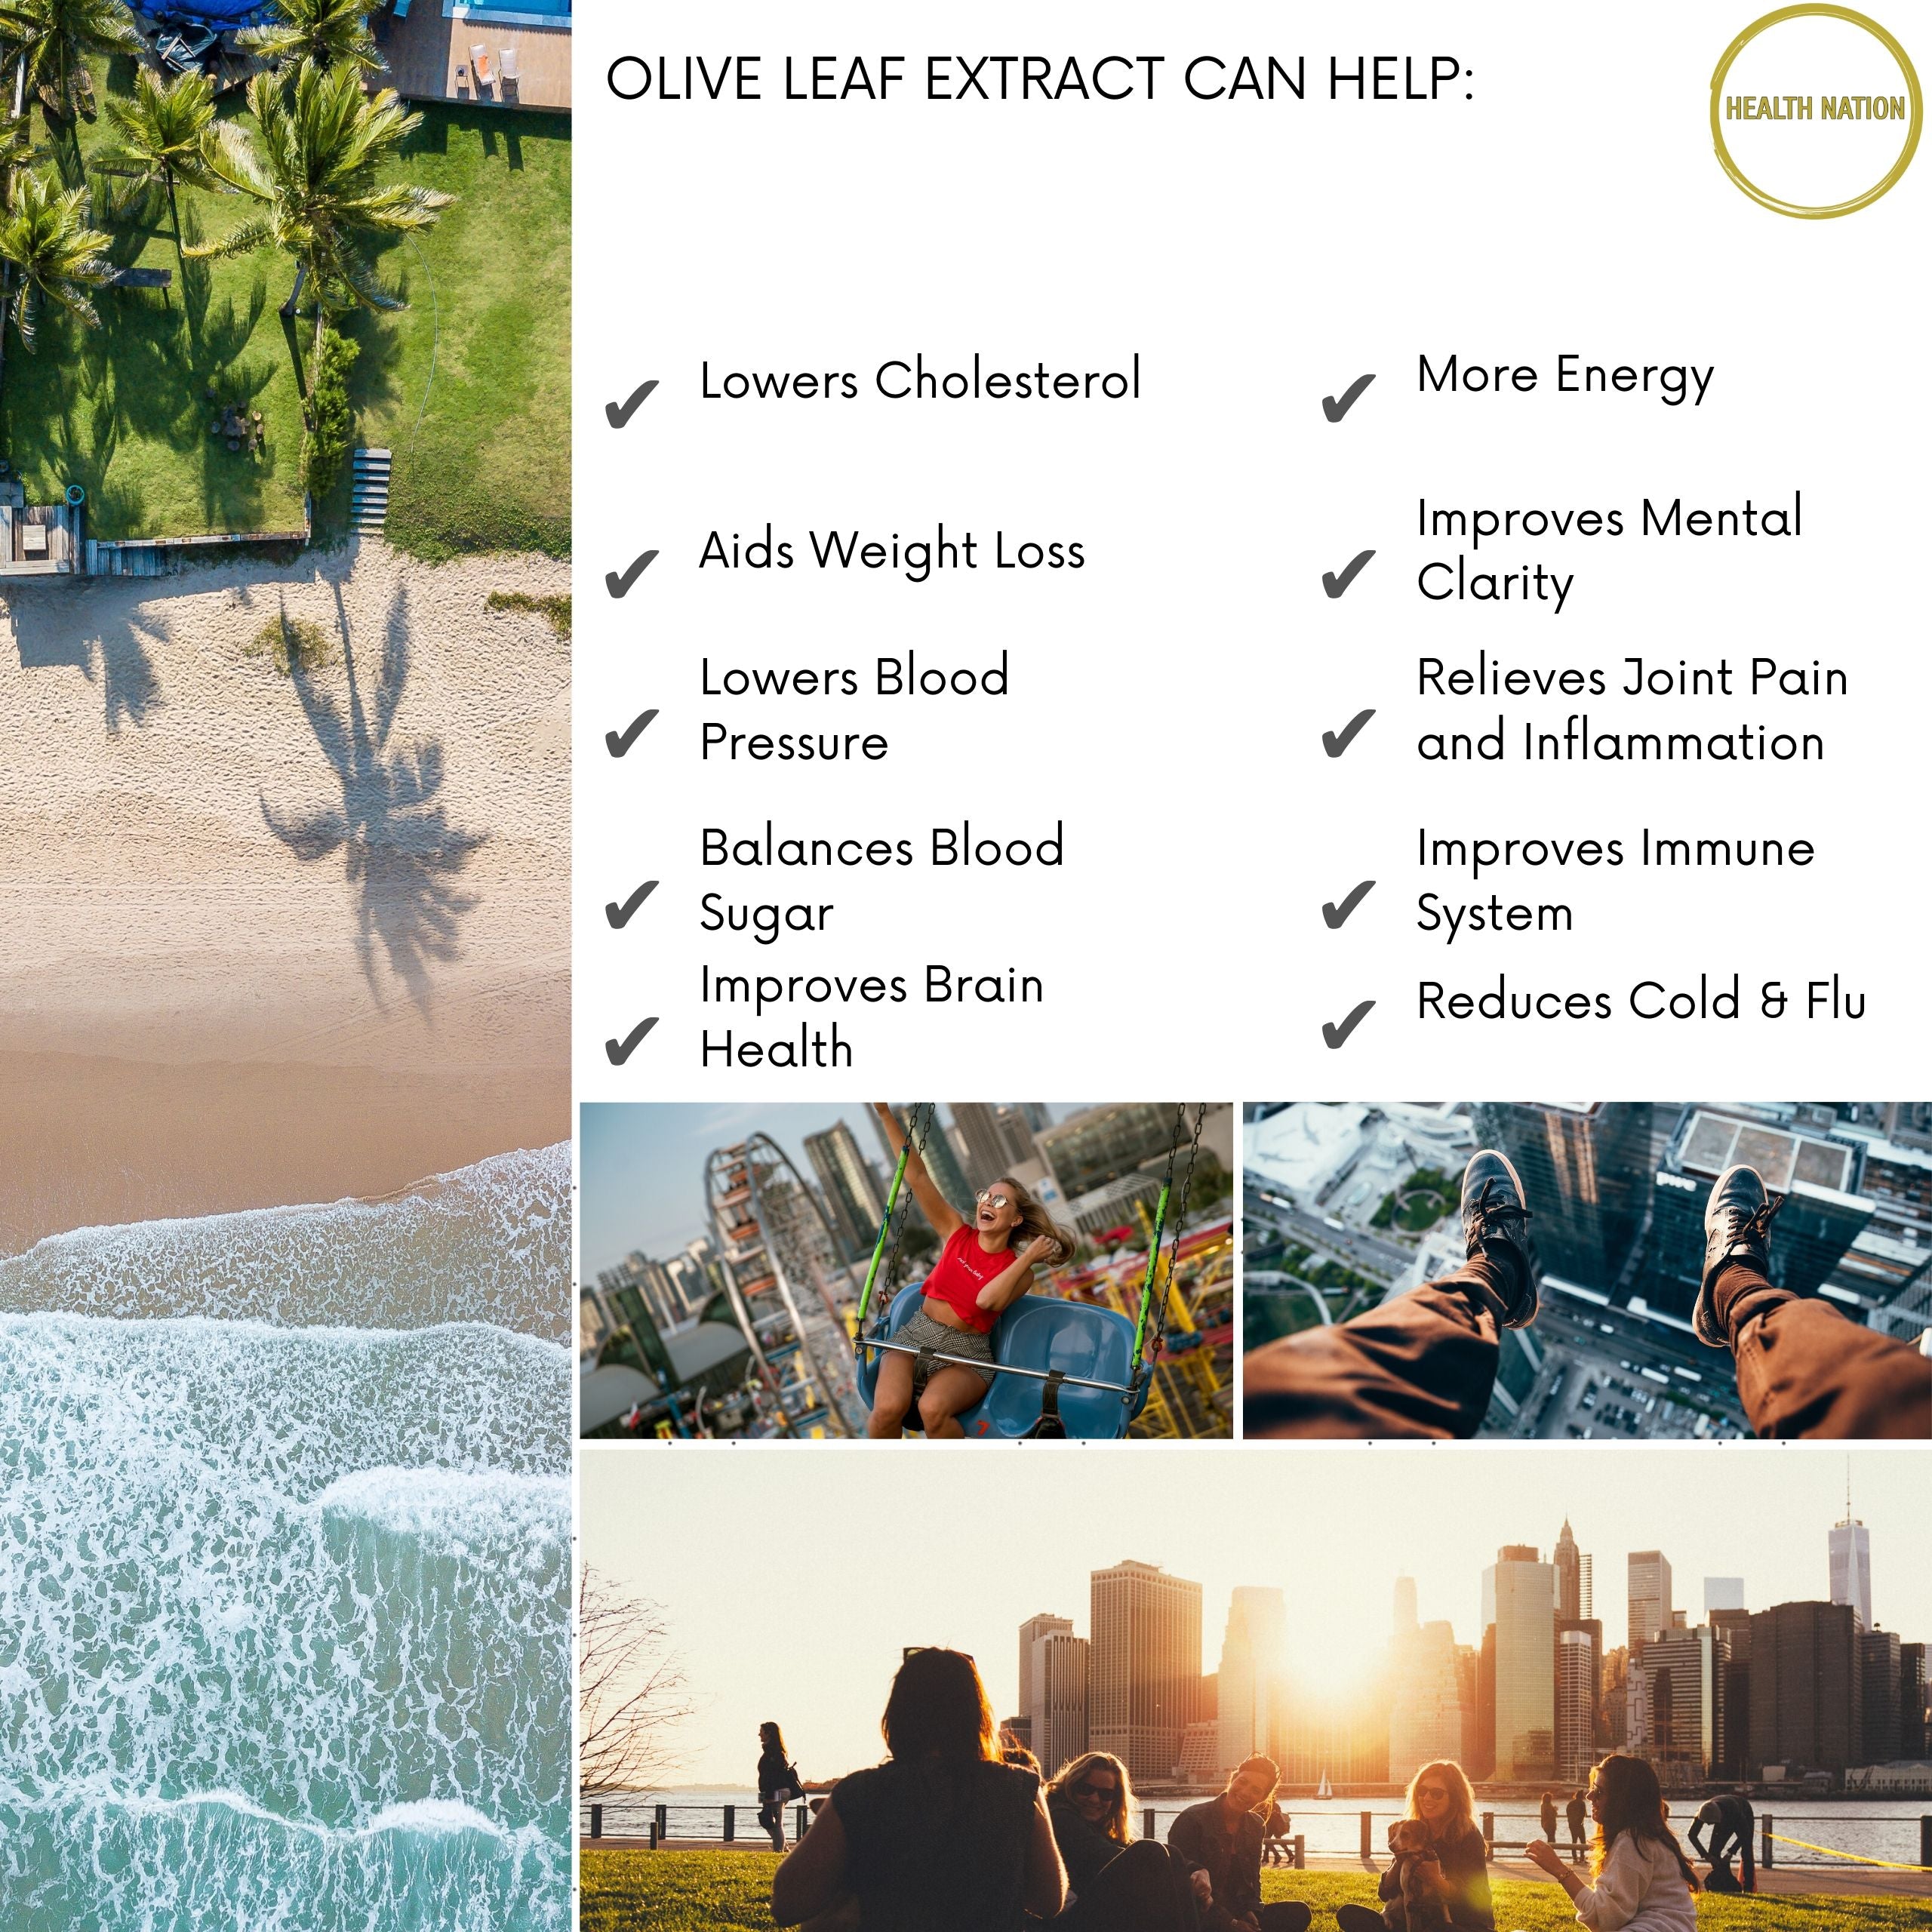 Olive Leaf Extract | Helps with Mental Clarity, Energy, Cold/Flu, Joint Pain, Weight Loss and Balances Blood Sugar | Made in UK | 6750mg 60 Capsules - Health Nation